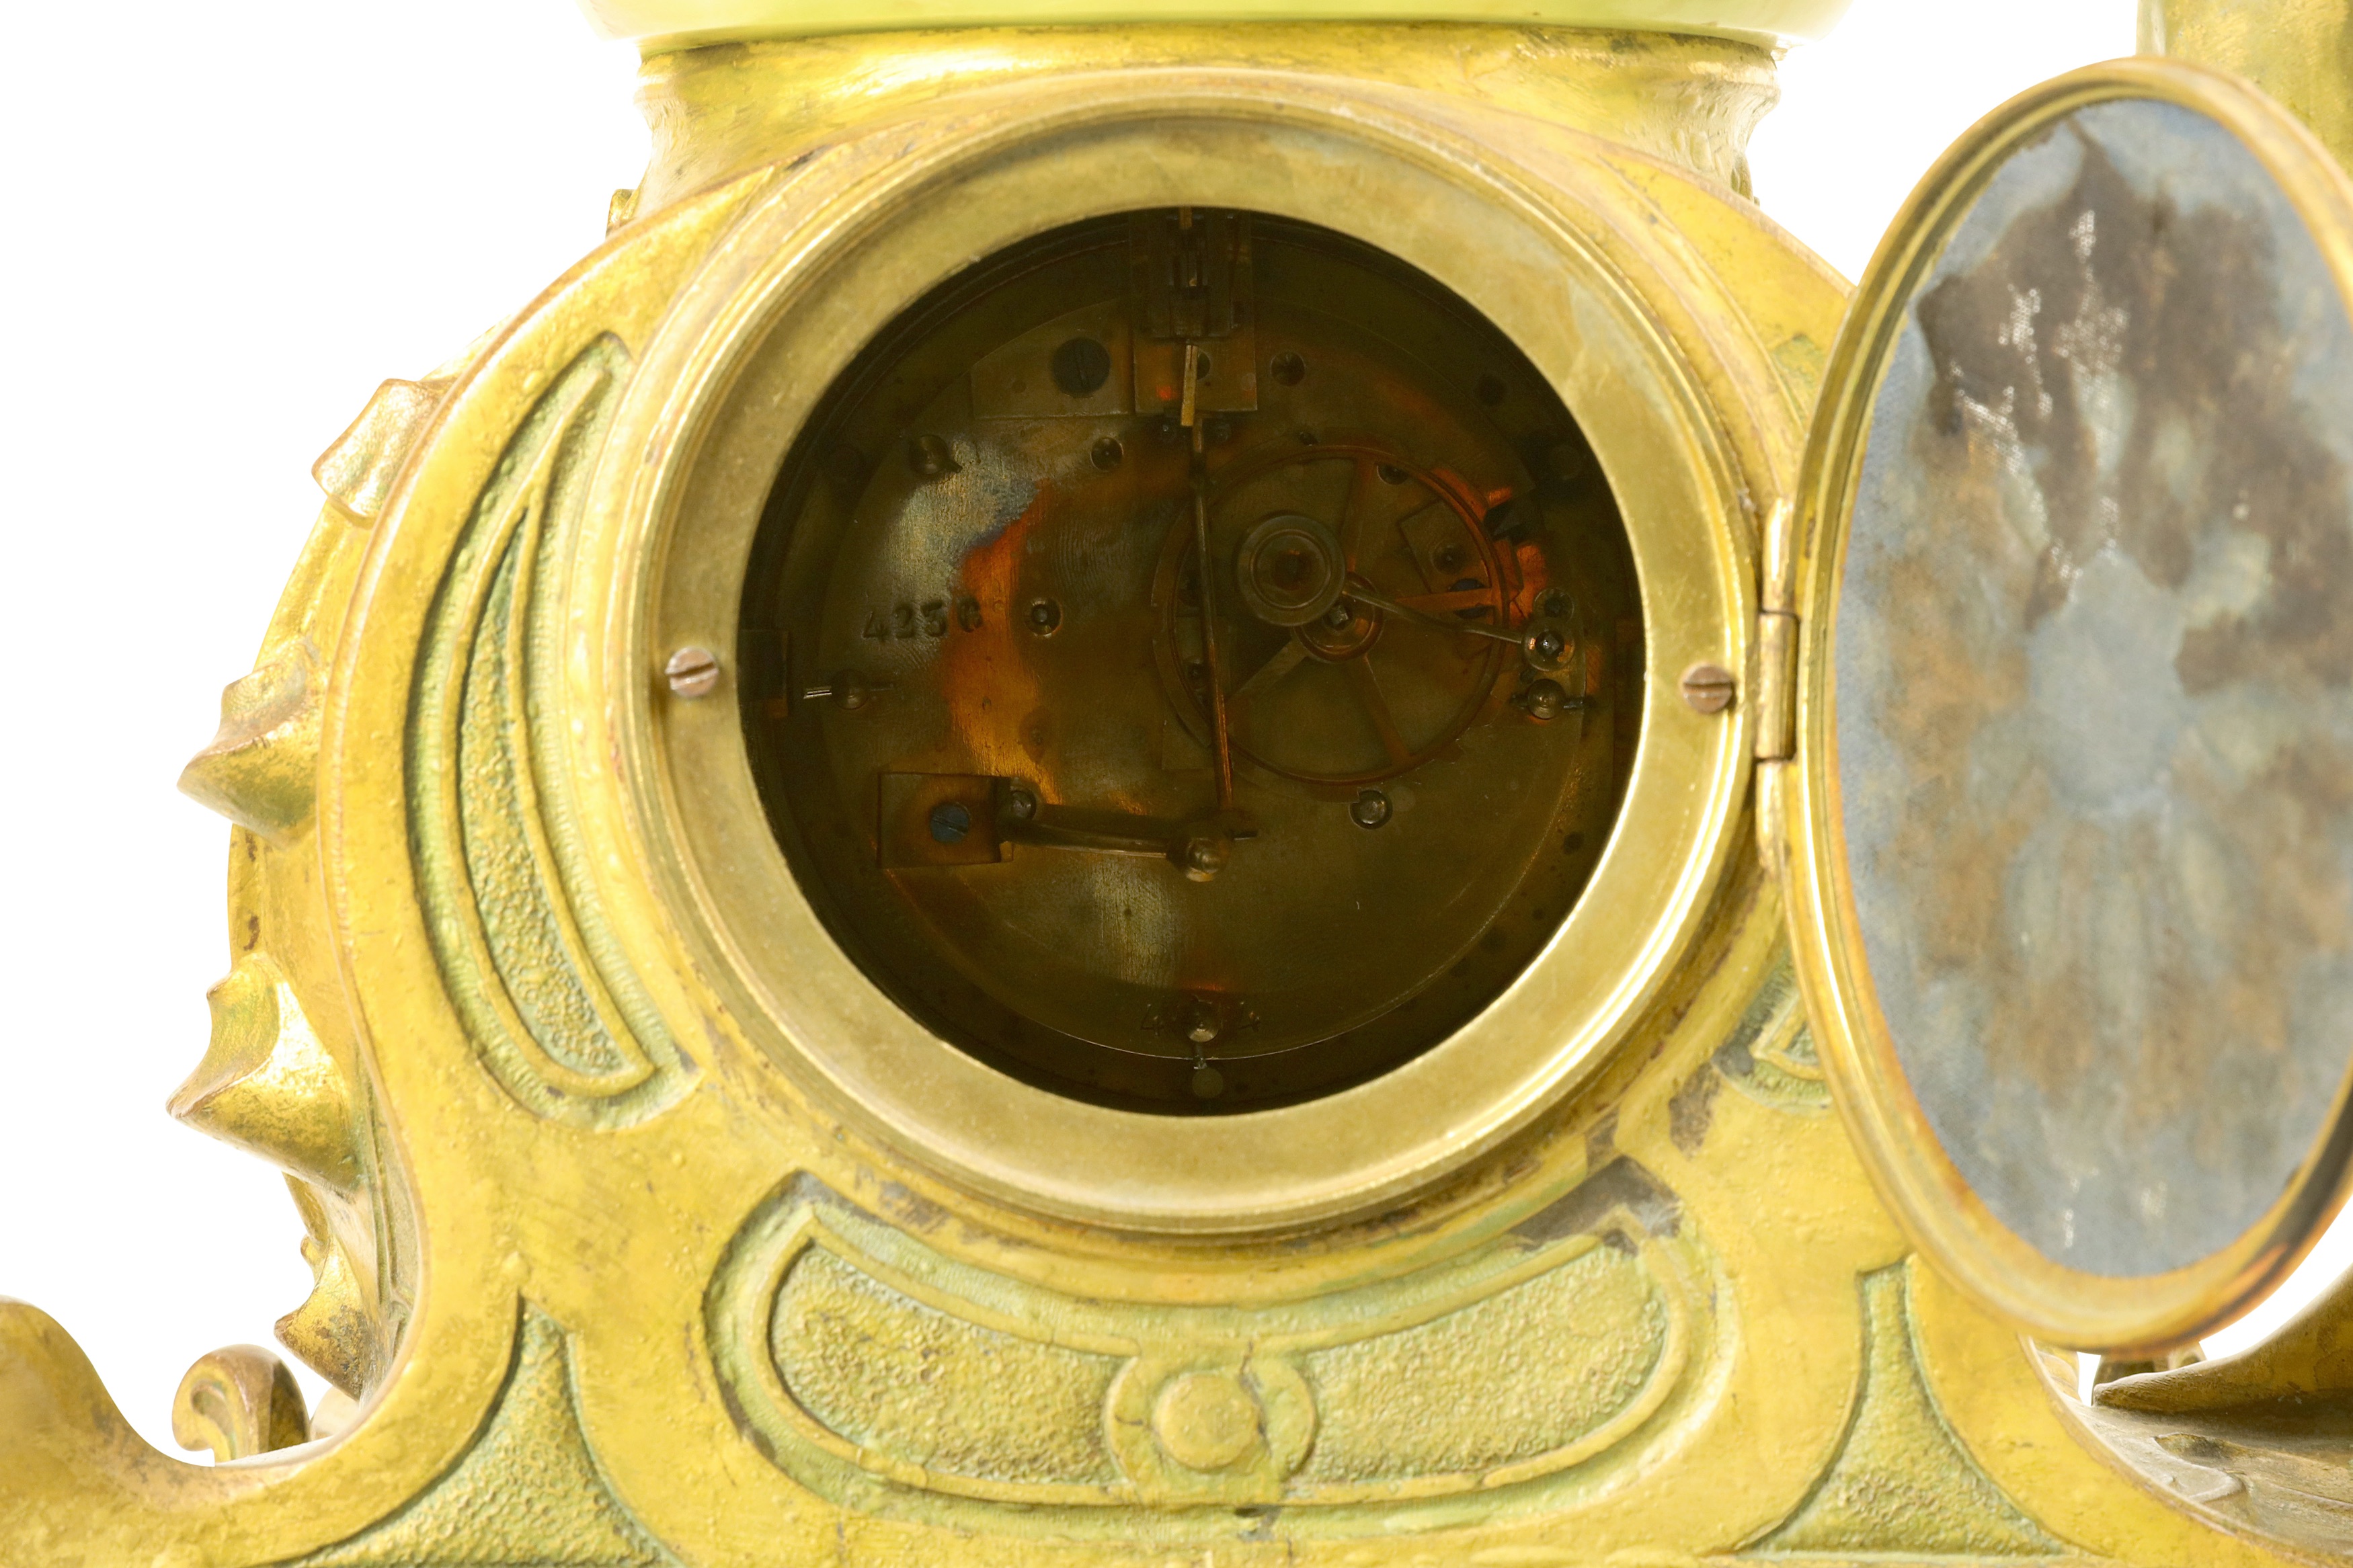 AN EARLY 20TH CENTURY ART NOUVEAU STYLE GILT BRONZE AND ONYX FIGURAL MANTEL CLOCK 'LA SOURCE' - Image 6 of 6